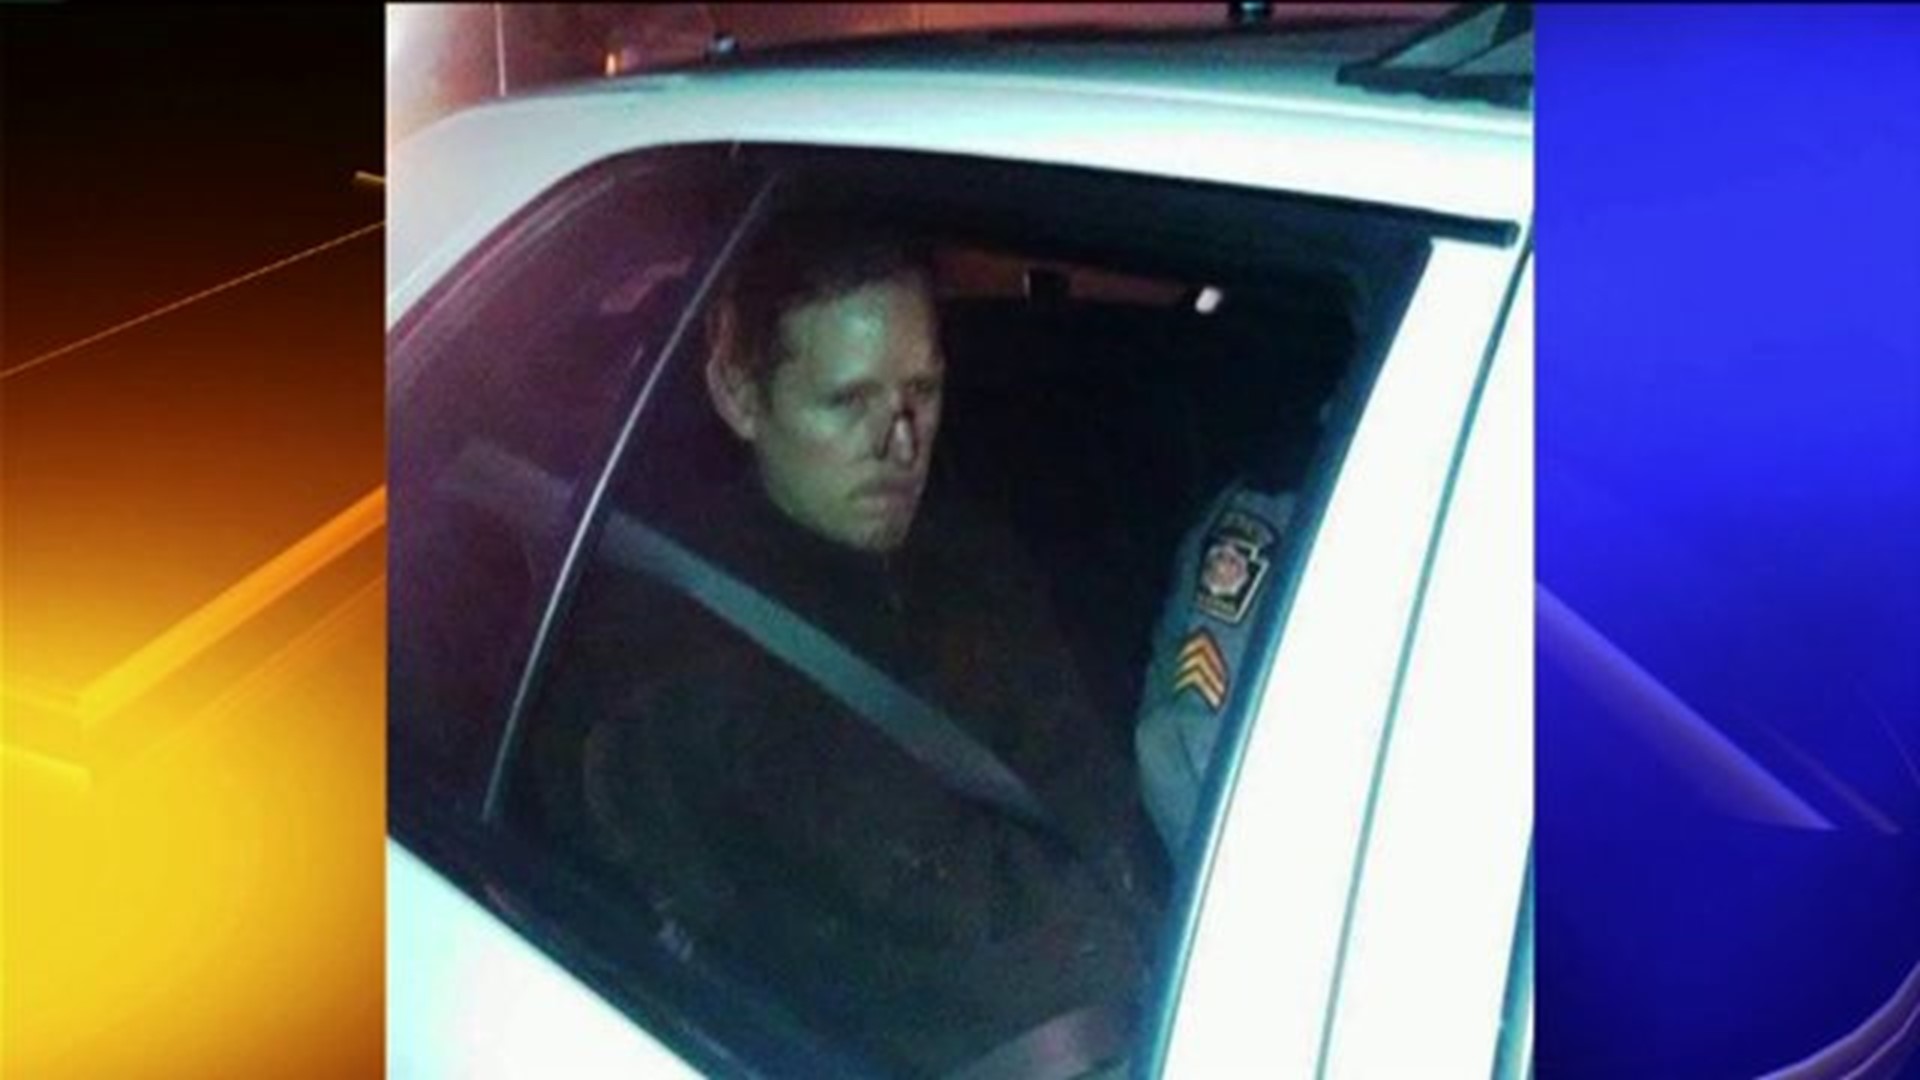 The Search for Eric Frein: A Look Back